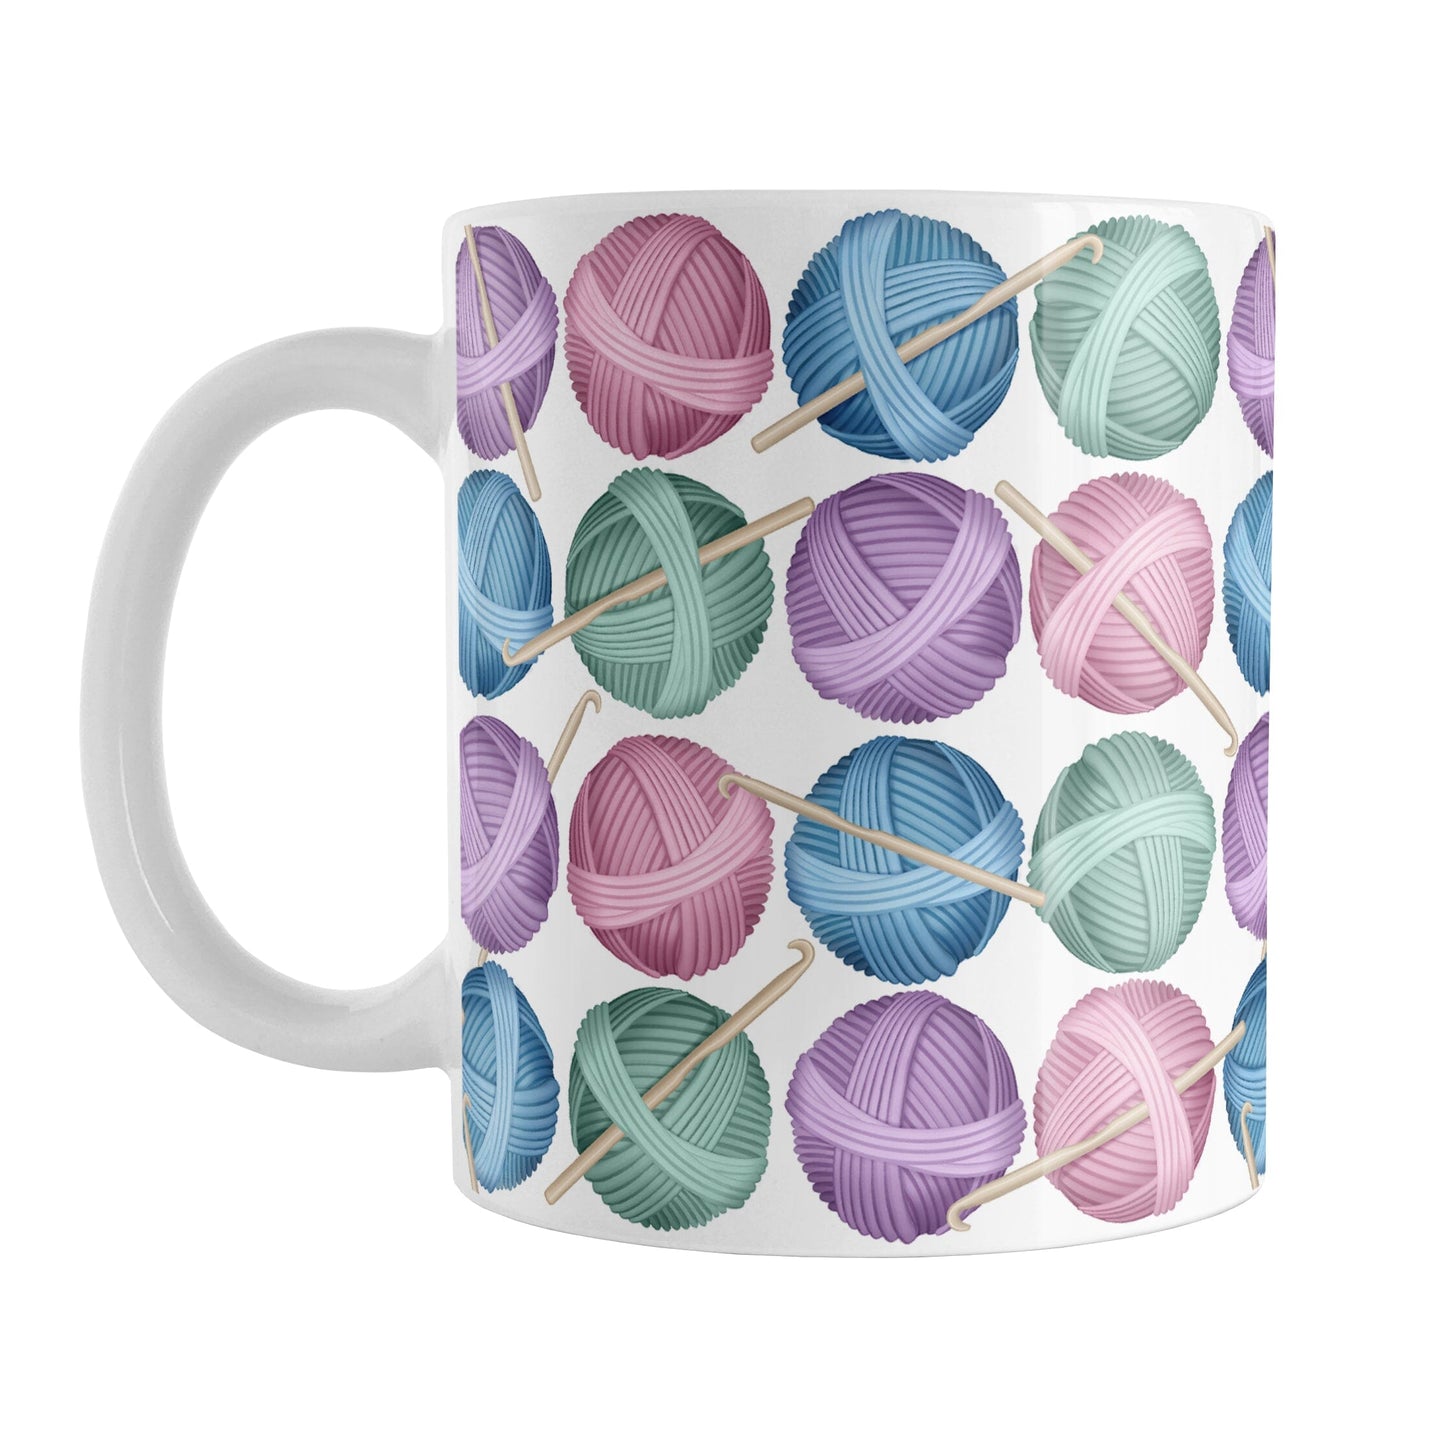 Crochet Yarn Pattern Mug (11oz) at Amy's Coffee Mugs. A ceramic coffee mug designed with colorful balls of yarn in blue, pink, purple, and mint green with crochet hooks in a pattern that wraps around the mug up to the handle. 